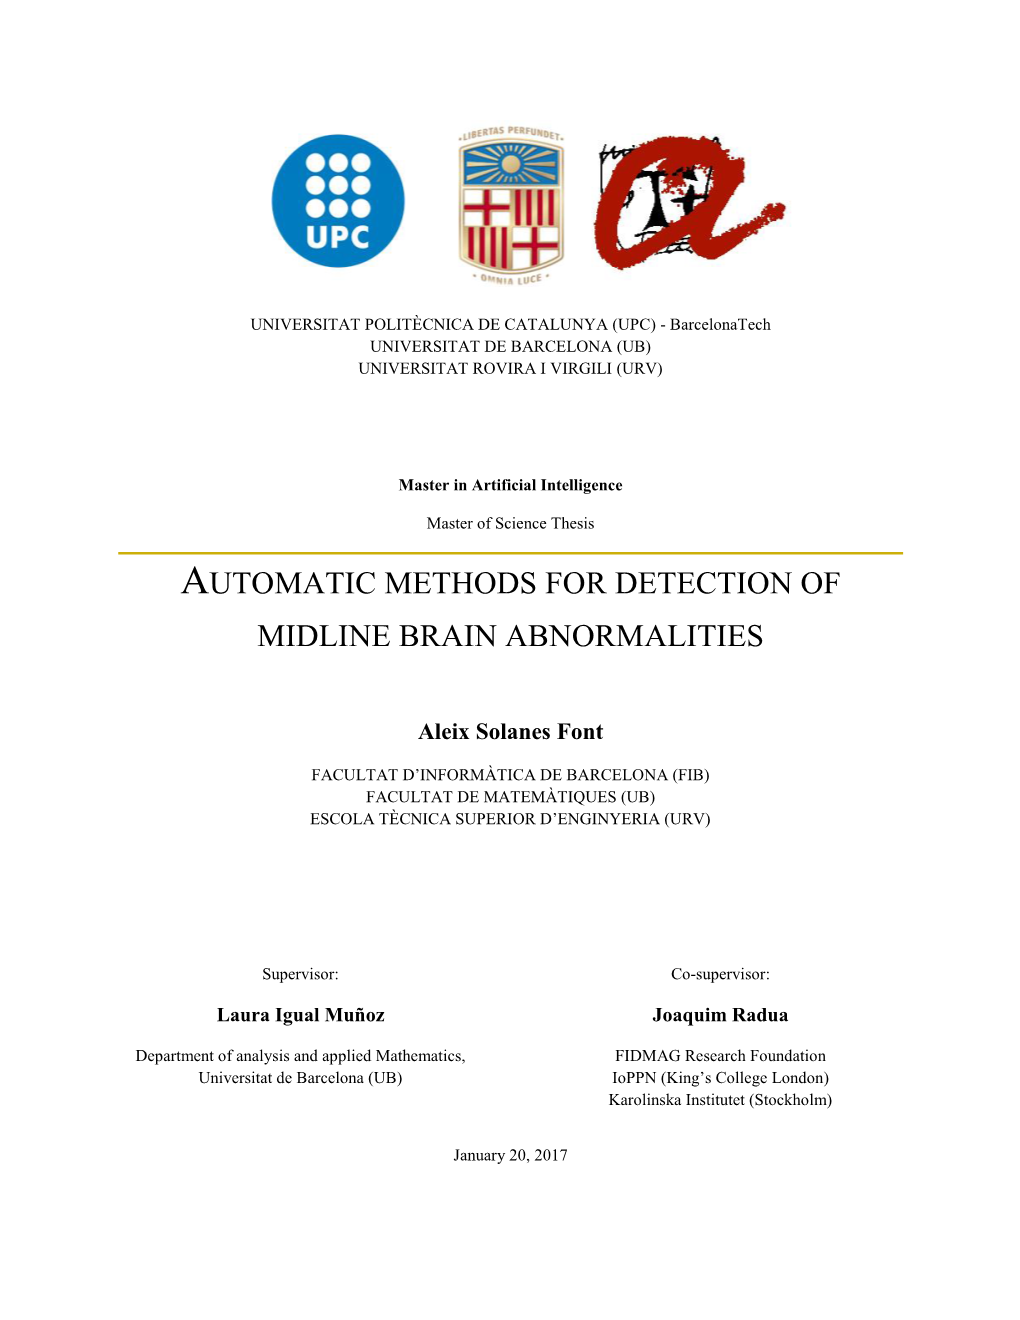 Automatic Methods for Detection of Midline Brain Abnormalities